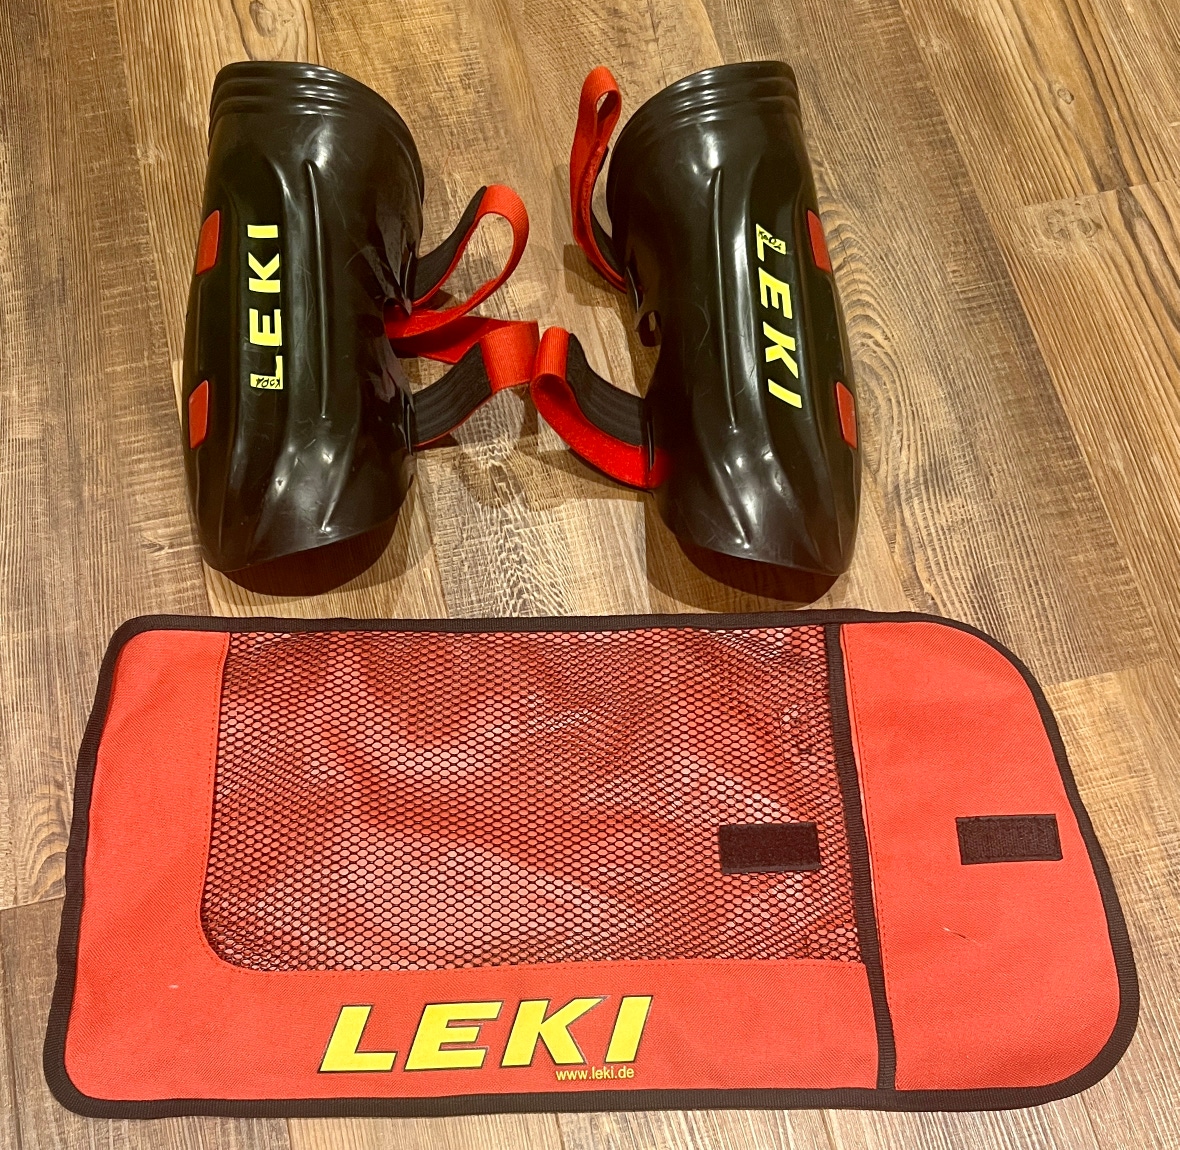 LEKI Shin Guards Used One Size Fits All